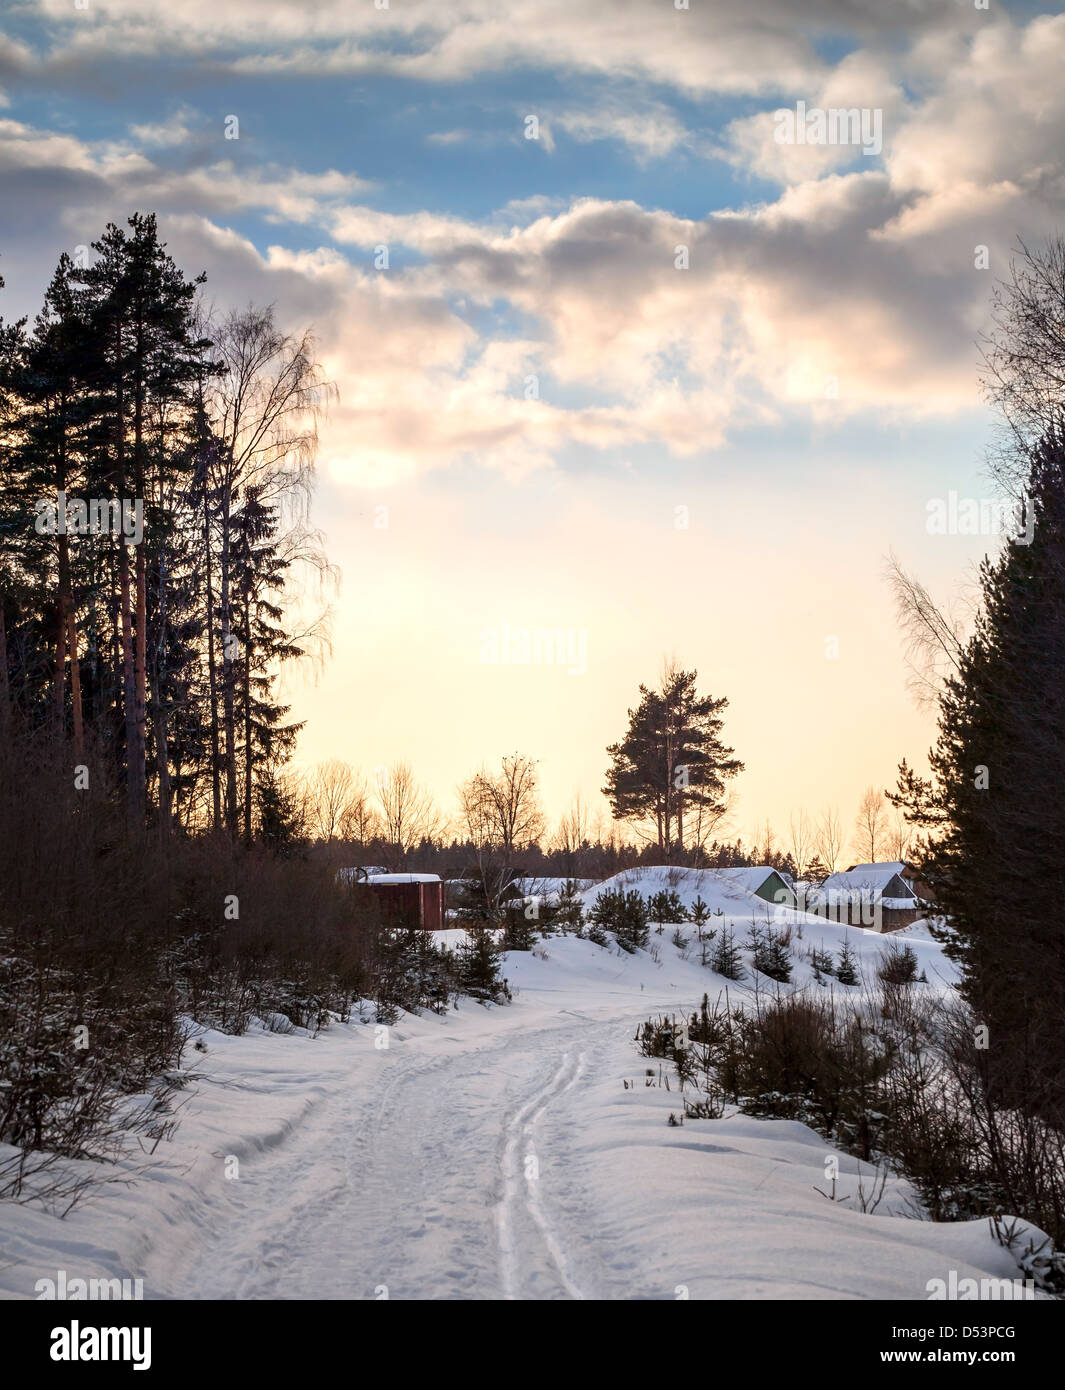 Snowy road in cold winter village under evening cloudy sky. Karelia, Russia Stock Photo